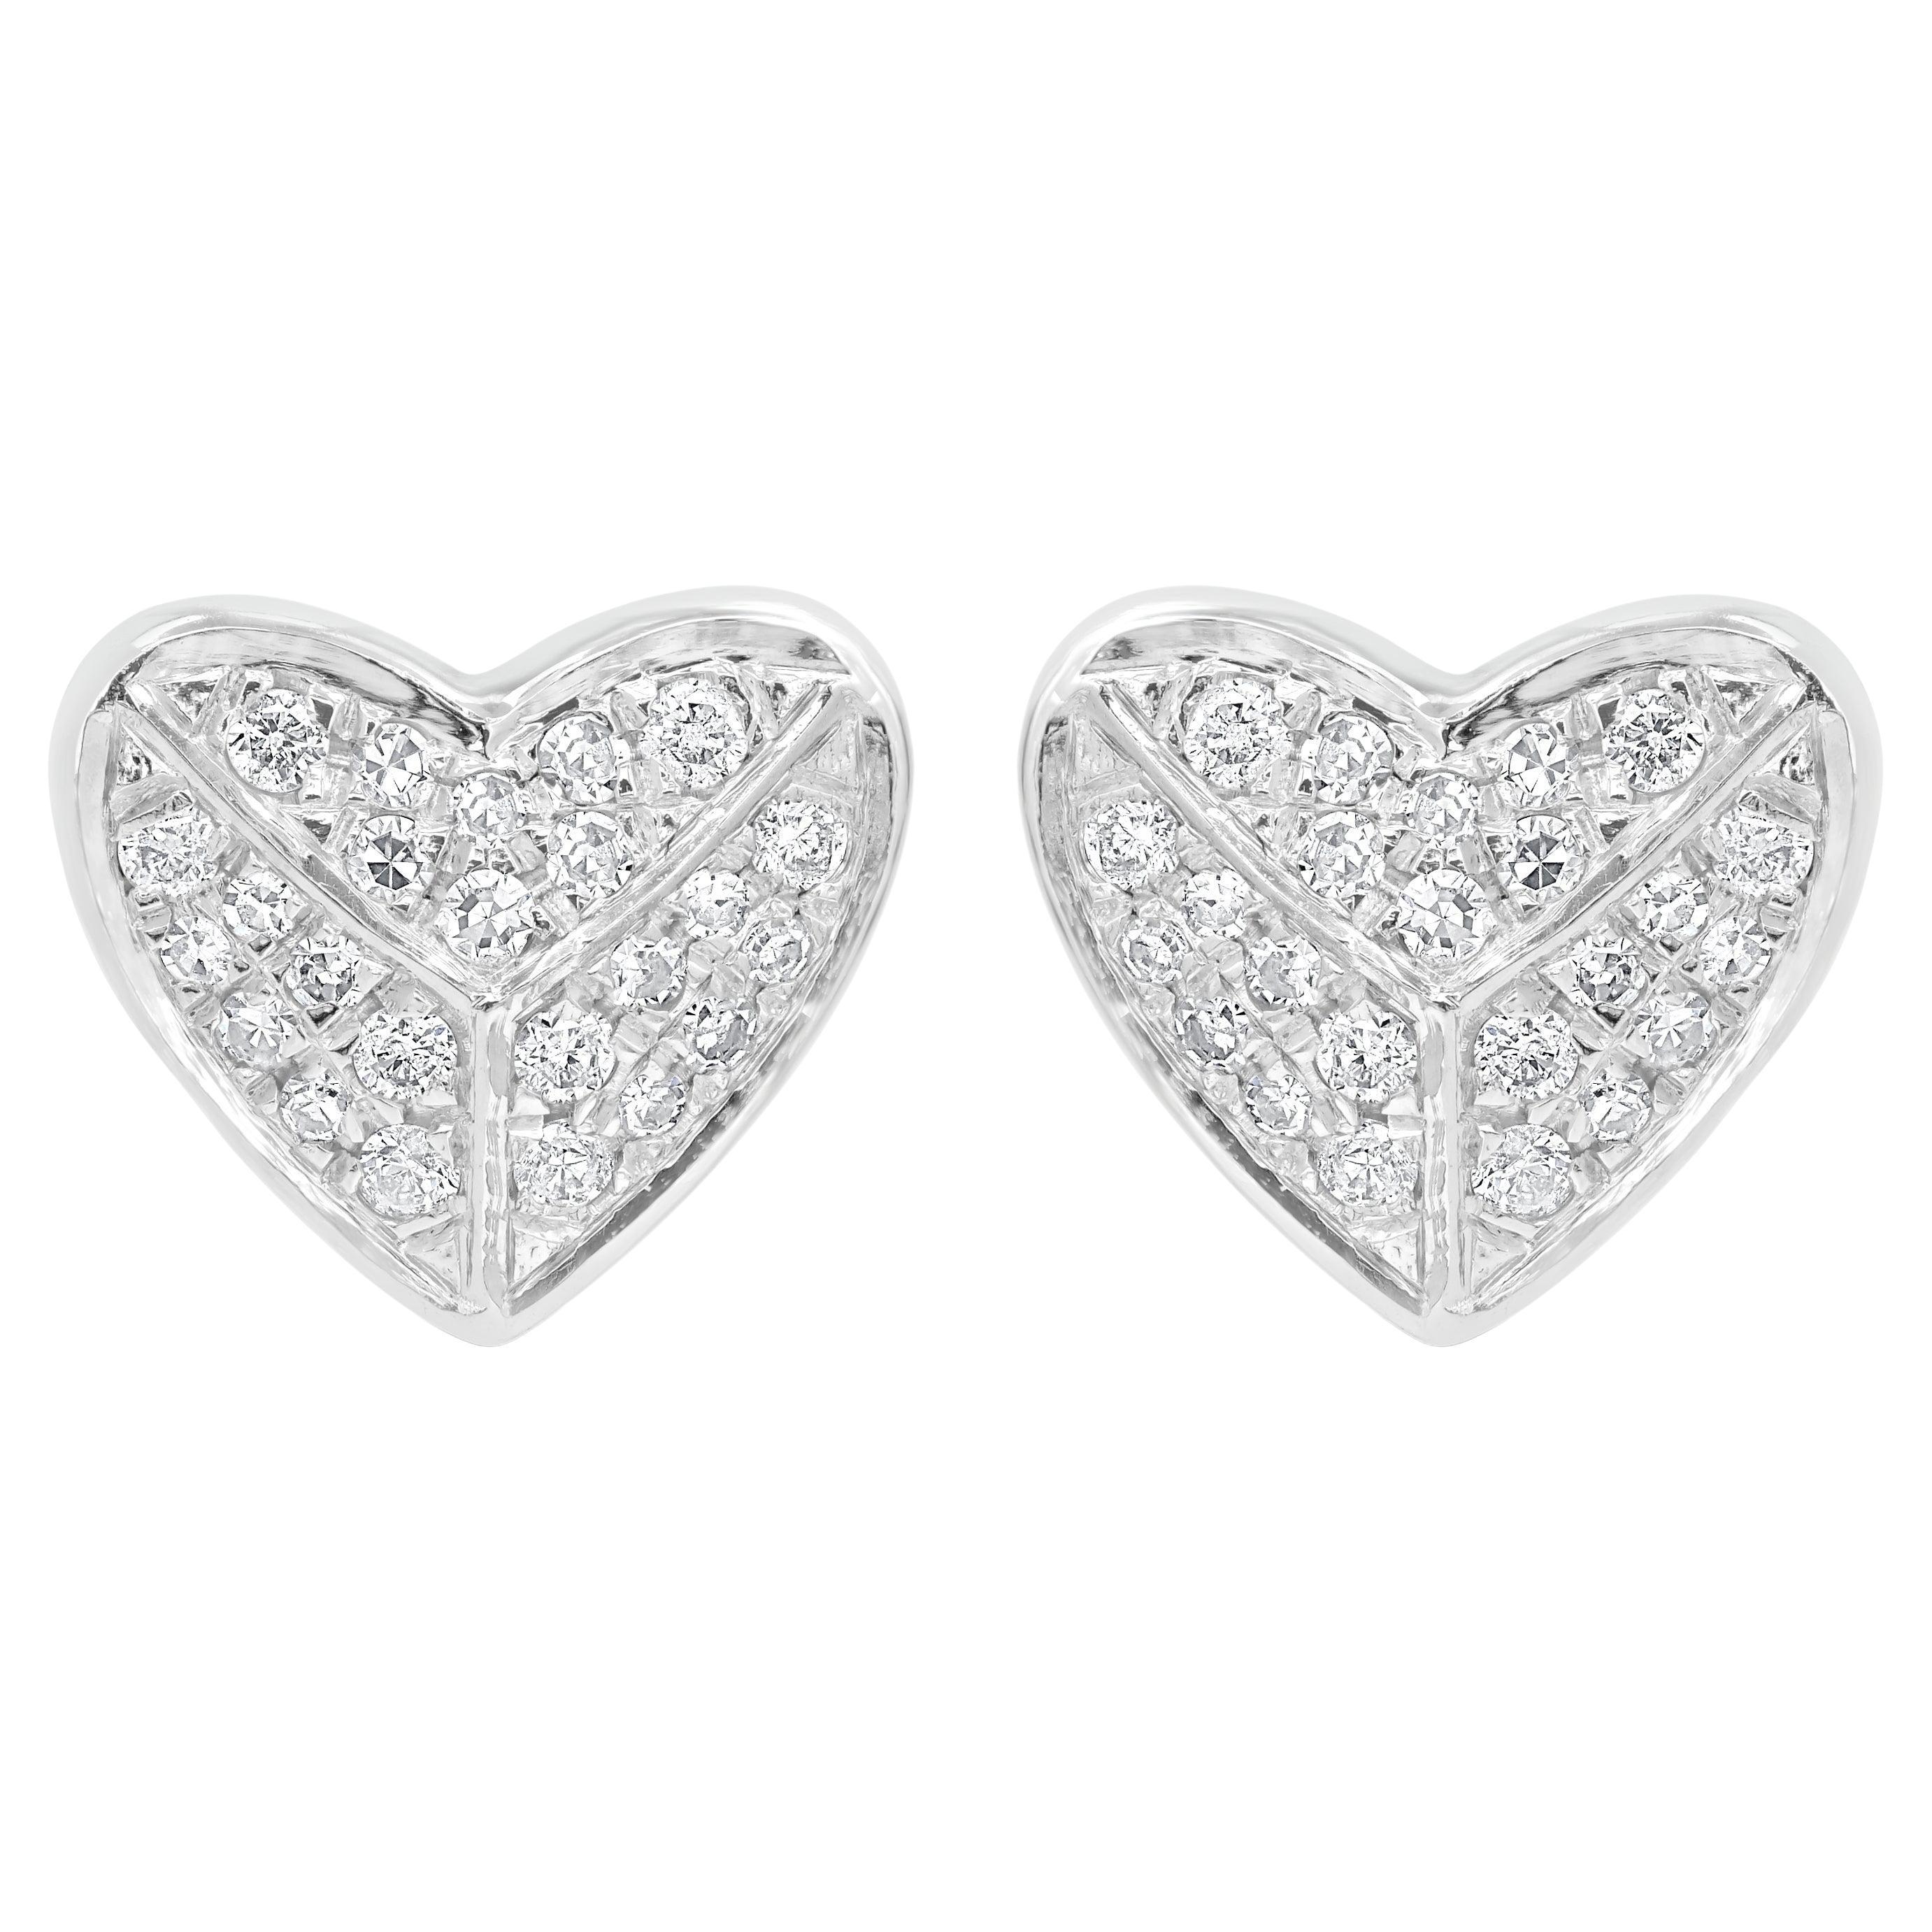 Add a romantic sparkle to your look with these Luxle stunning heart earrings made with 14k white gold and genuine diamonds. These heart-shaped stud earrings are adorable and small, and they're crafted just for you! This pair of 14K White Gold